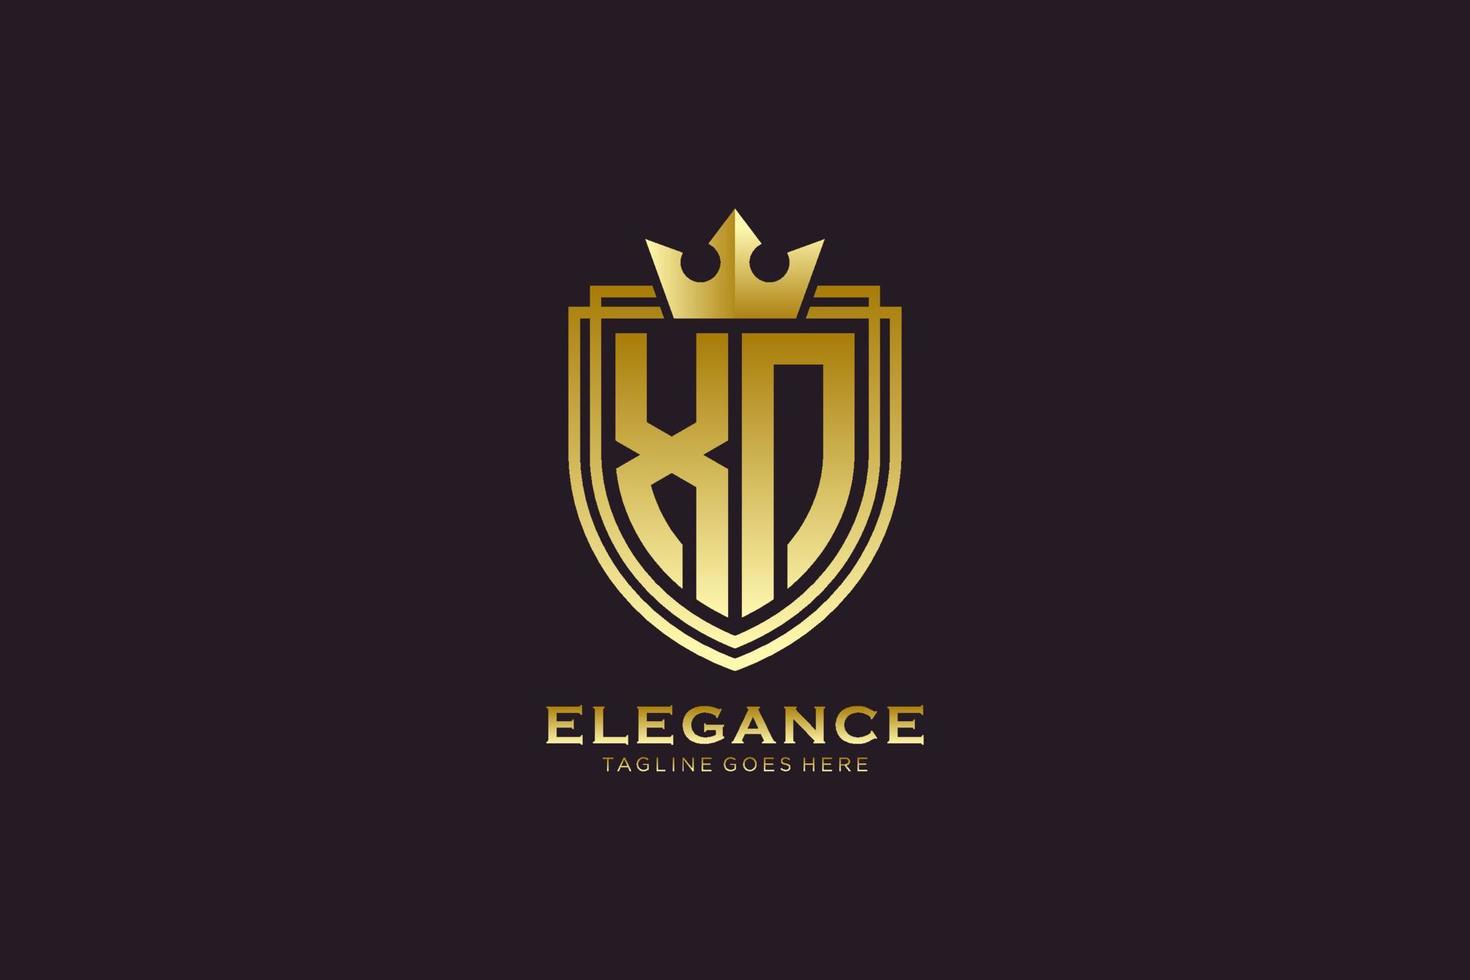 initial XN elegant luxury monogram logo or badge template with scrolls and royal crown - perfect for luxurious branding projects vector